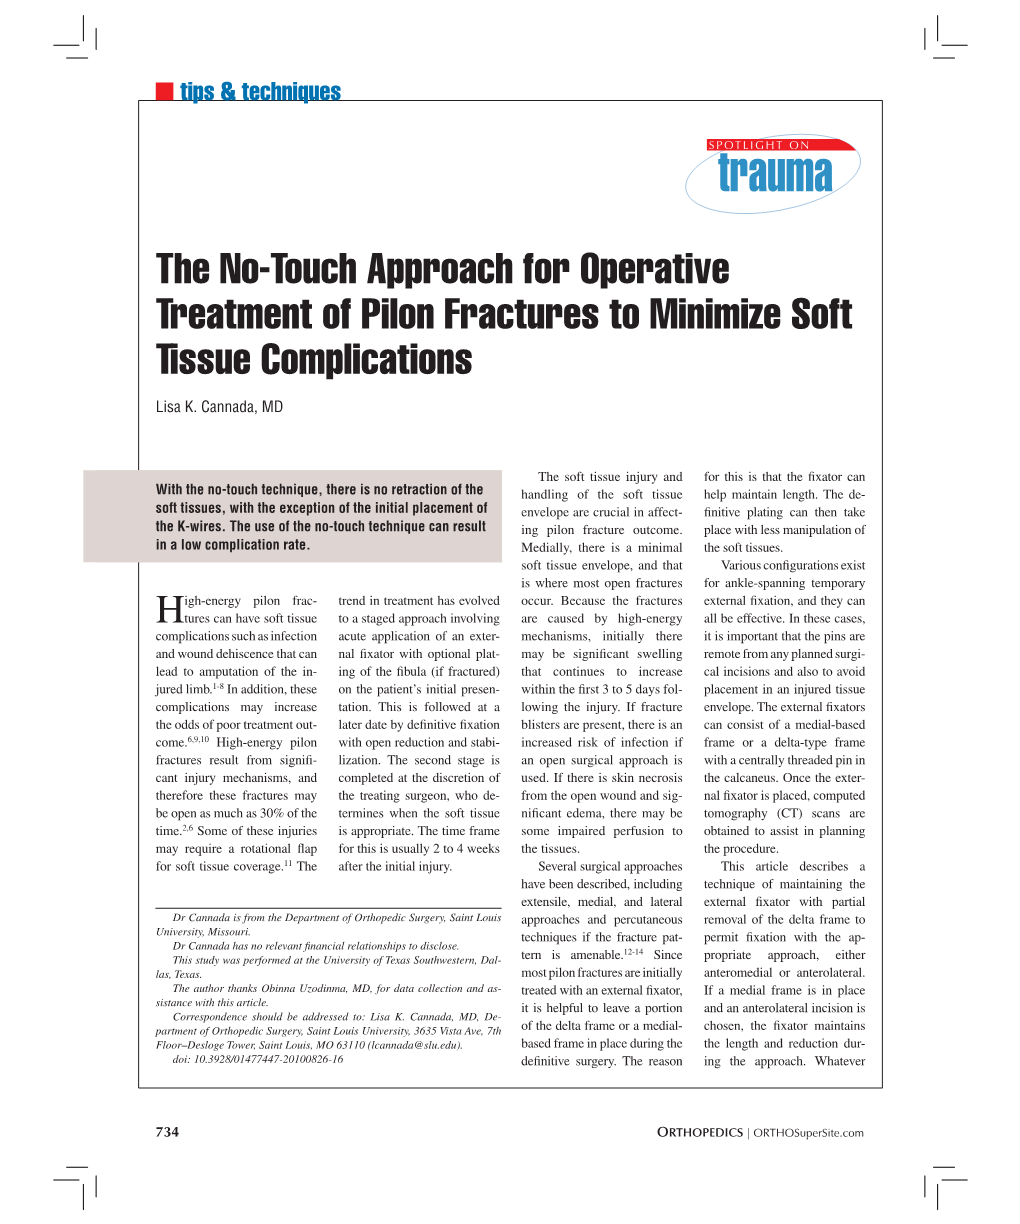 The No-Touch Approach for Operative Treatment of Pilon Fractures to Minimize Soft Tissue Complications